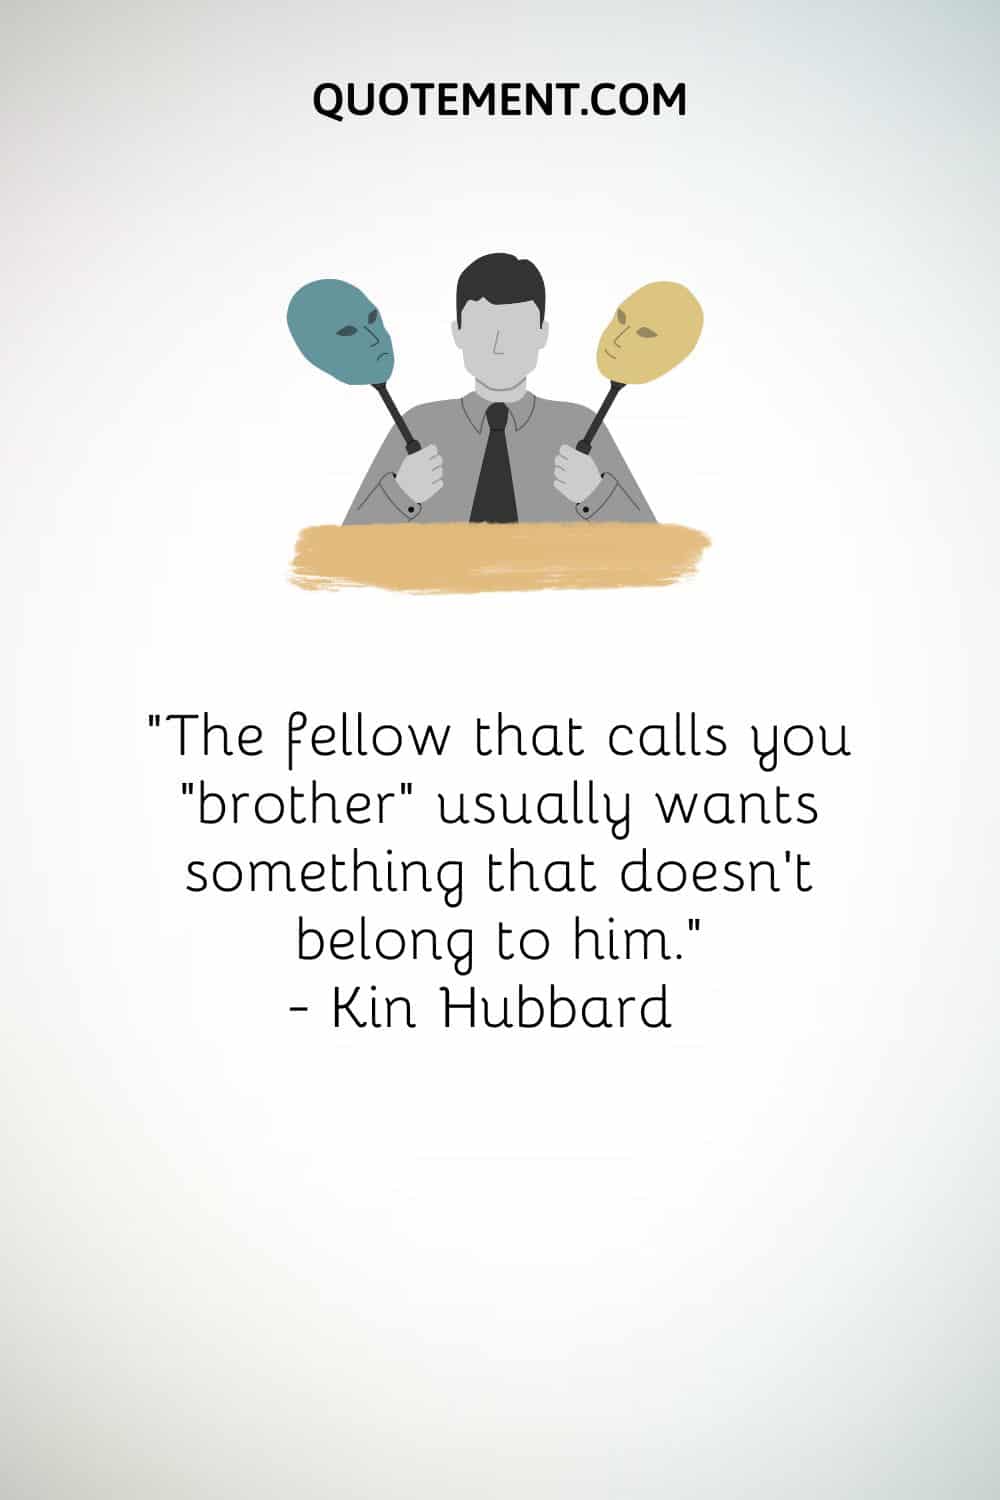 “The fellow that calls you “brother” usually wants something that doesn't belong to him.” — Kin Hubbard (2)